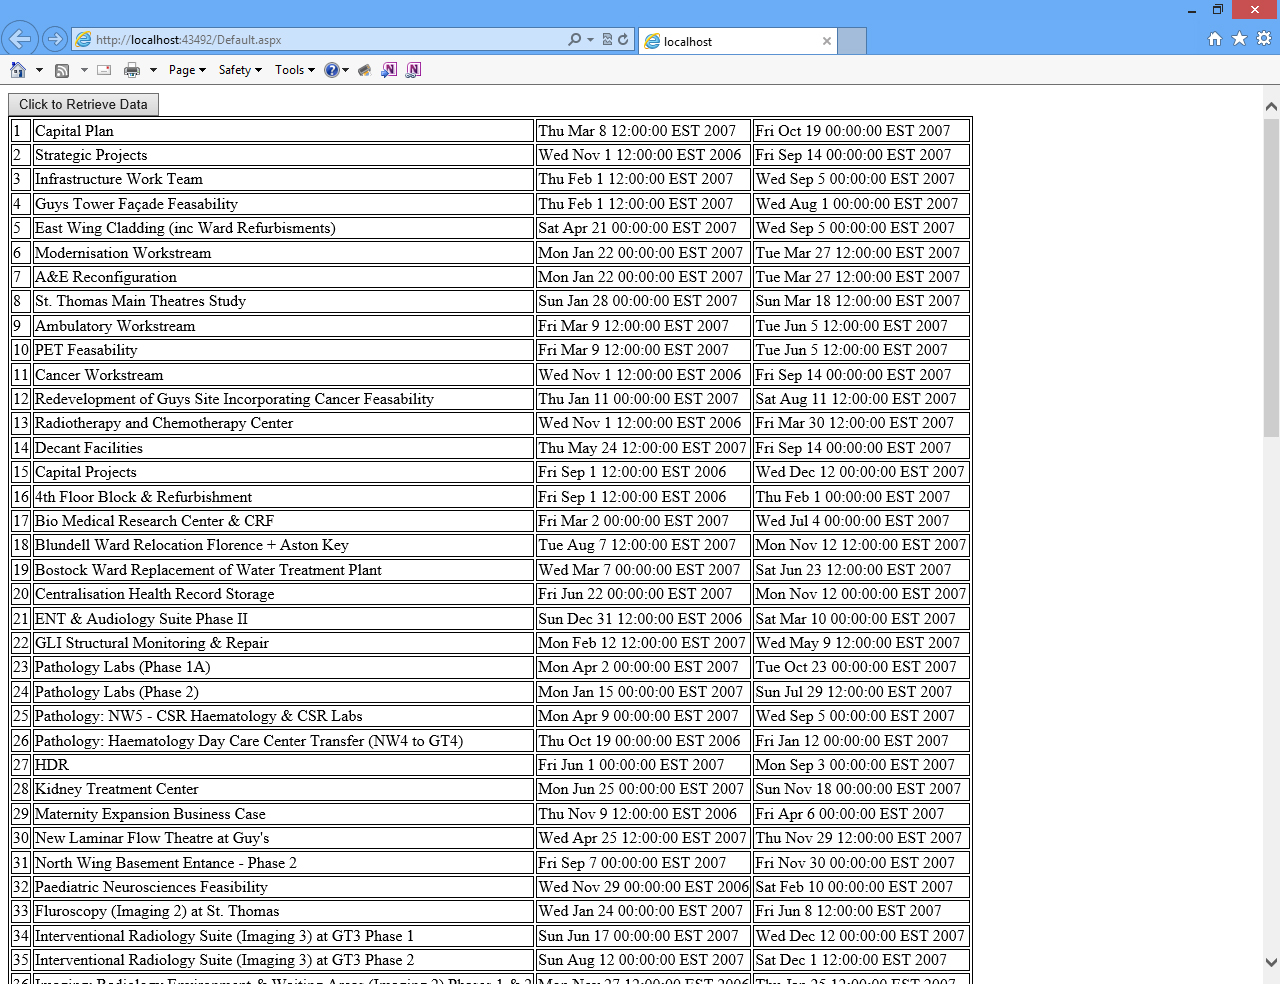 Internet Explorer page filled with information from the database